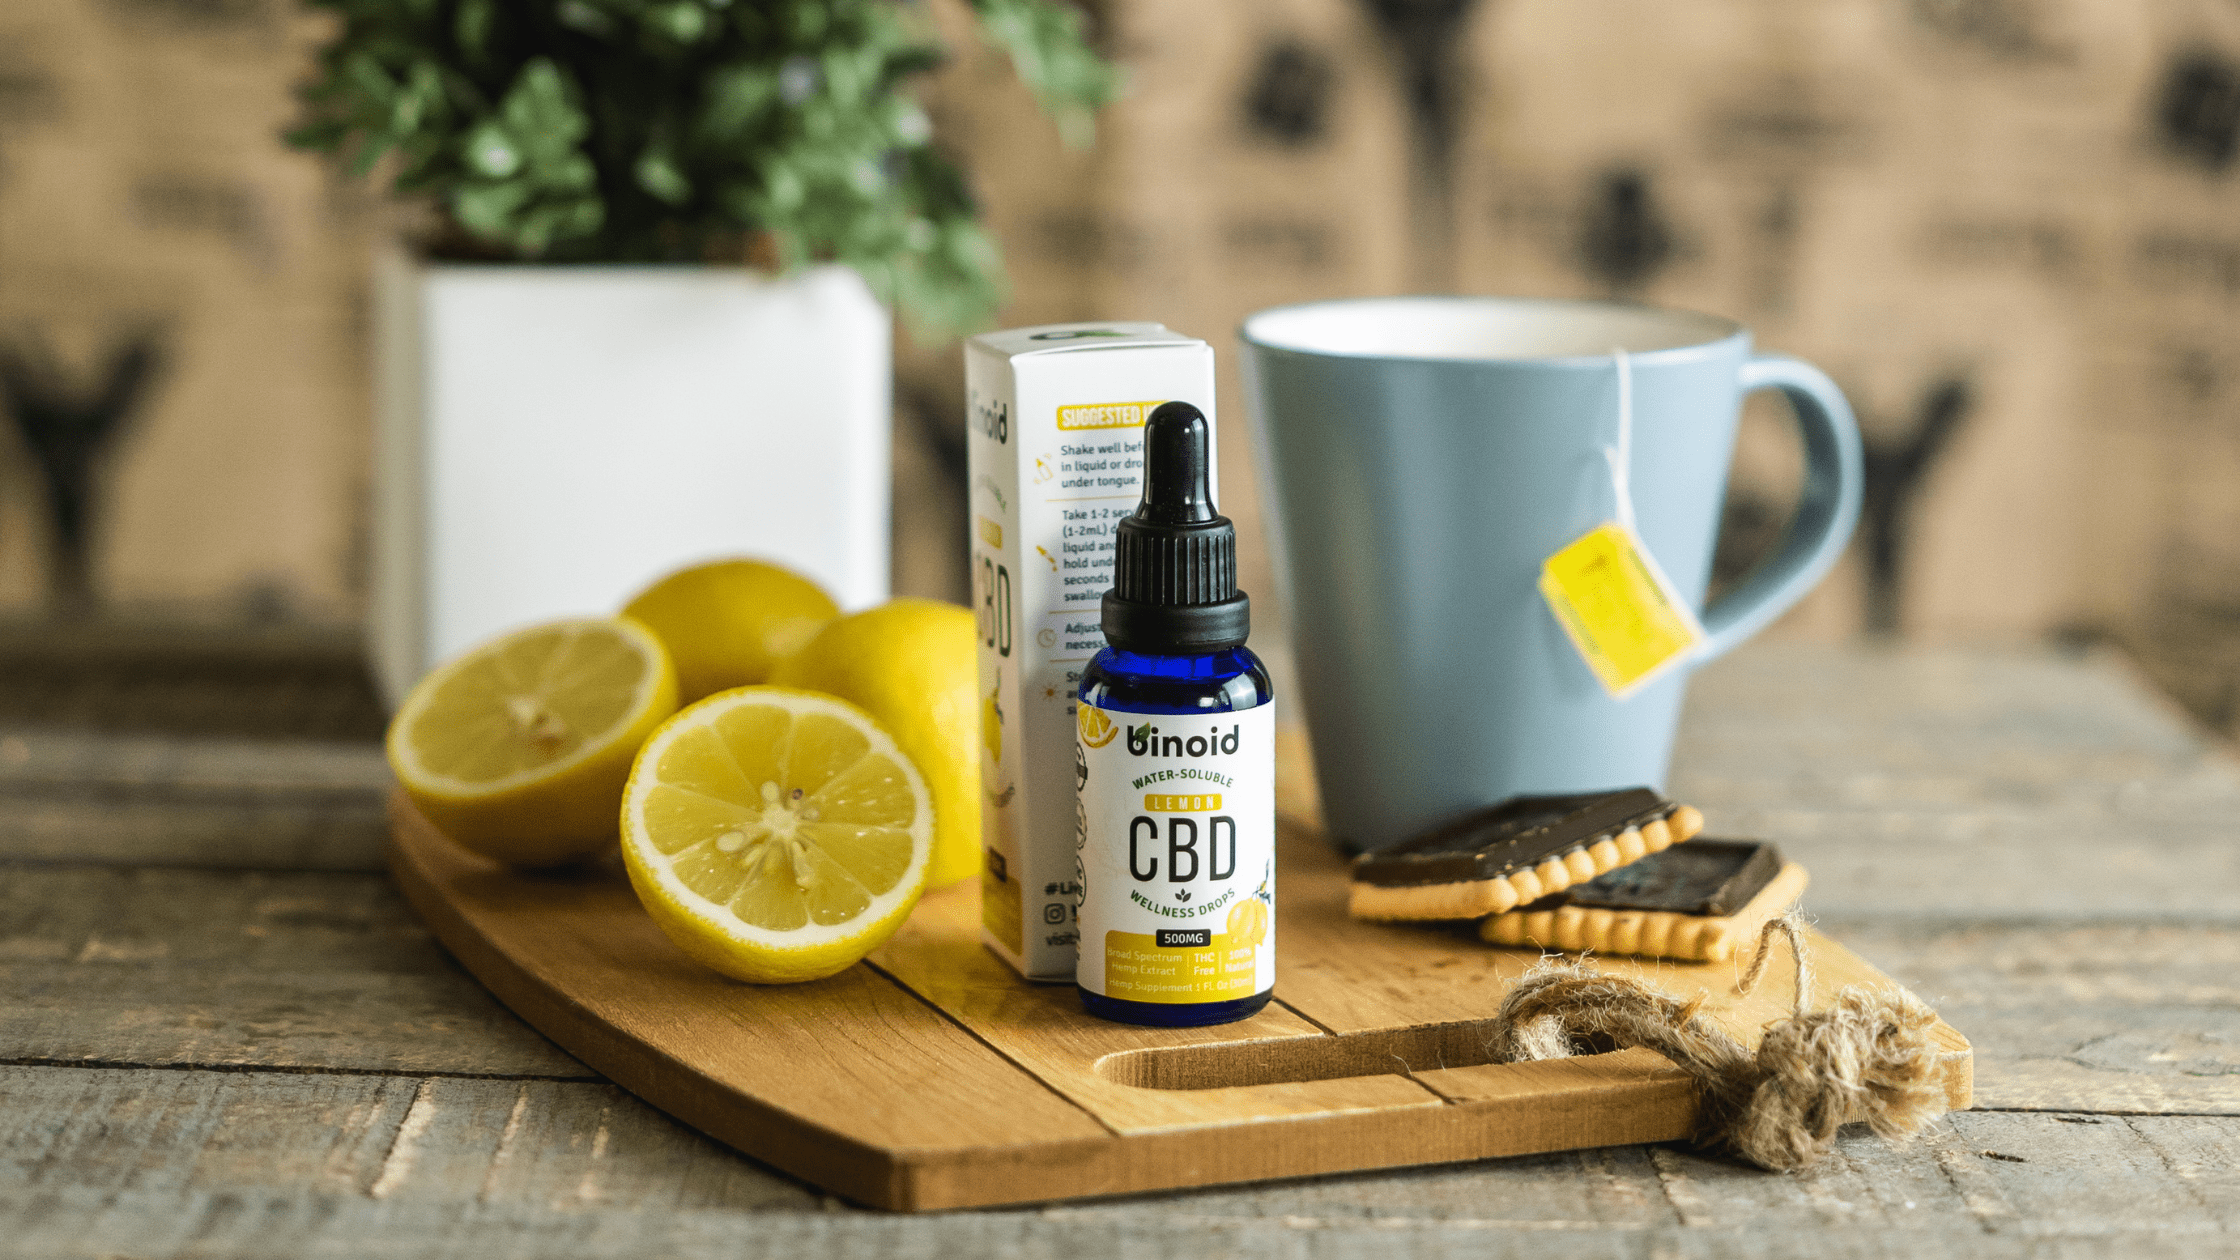 lemon flavored cbd oil is one of the herbs to relieve anxiety